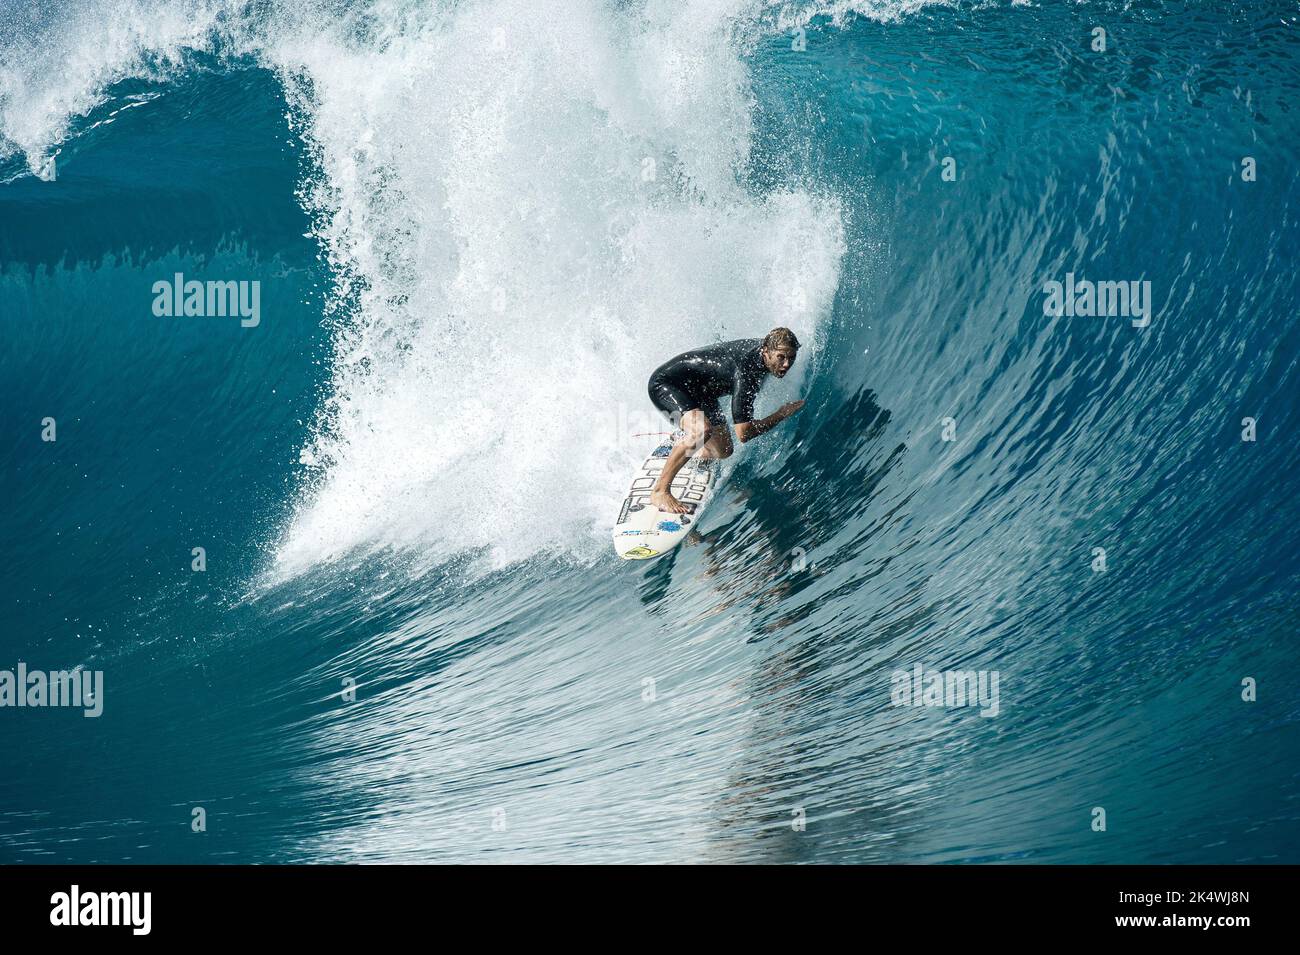 SURFING Australian surfer Anthony Walsh surf at Teahupoo during a big swell on September 11, 2014 at Teahupoo in Tahiti, French Polynesia - Photo: Julien Girardot/DPPI/LiveMedia Stock Photo